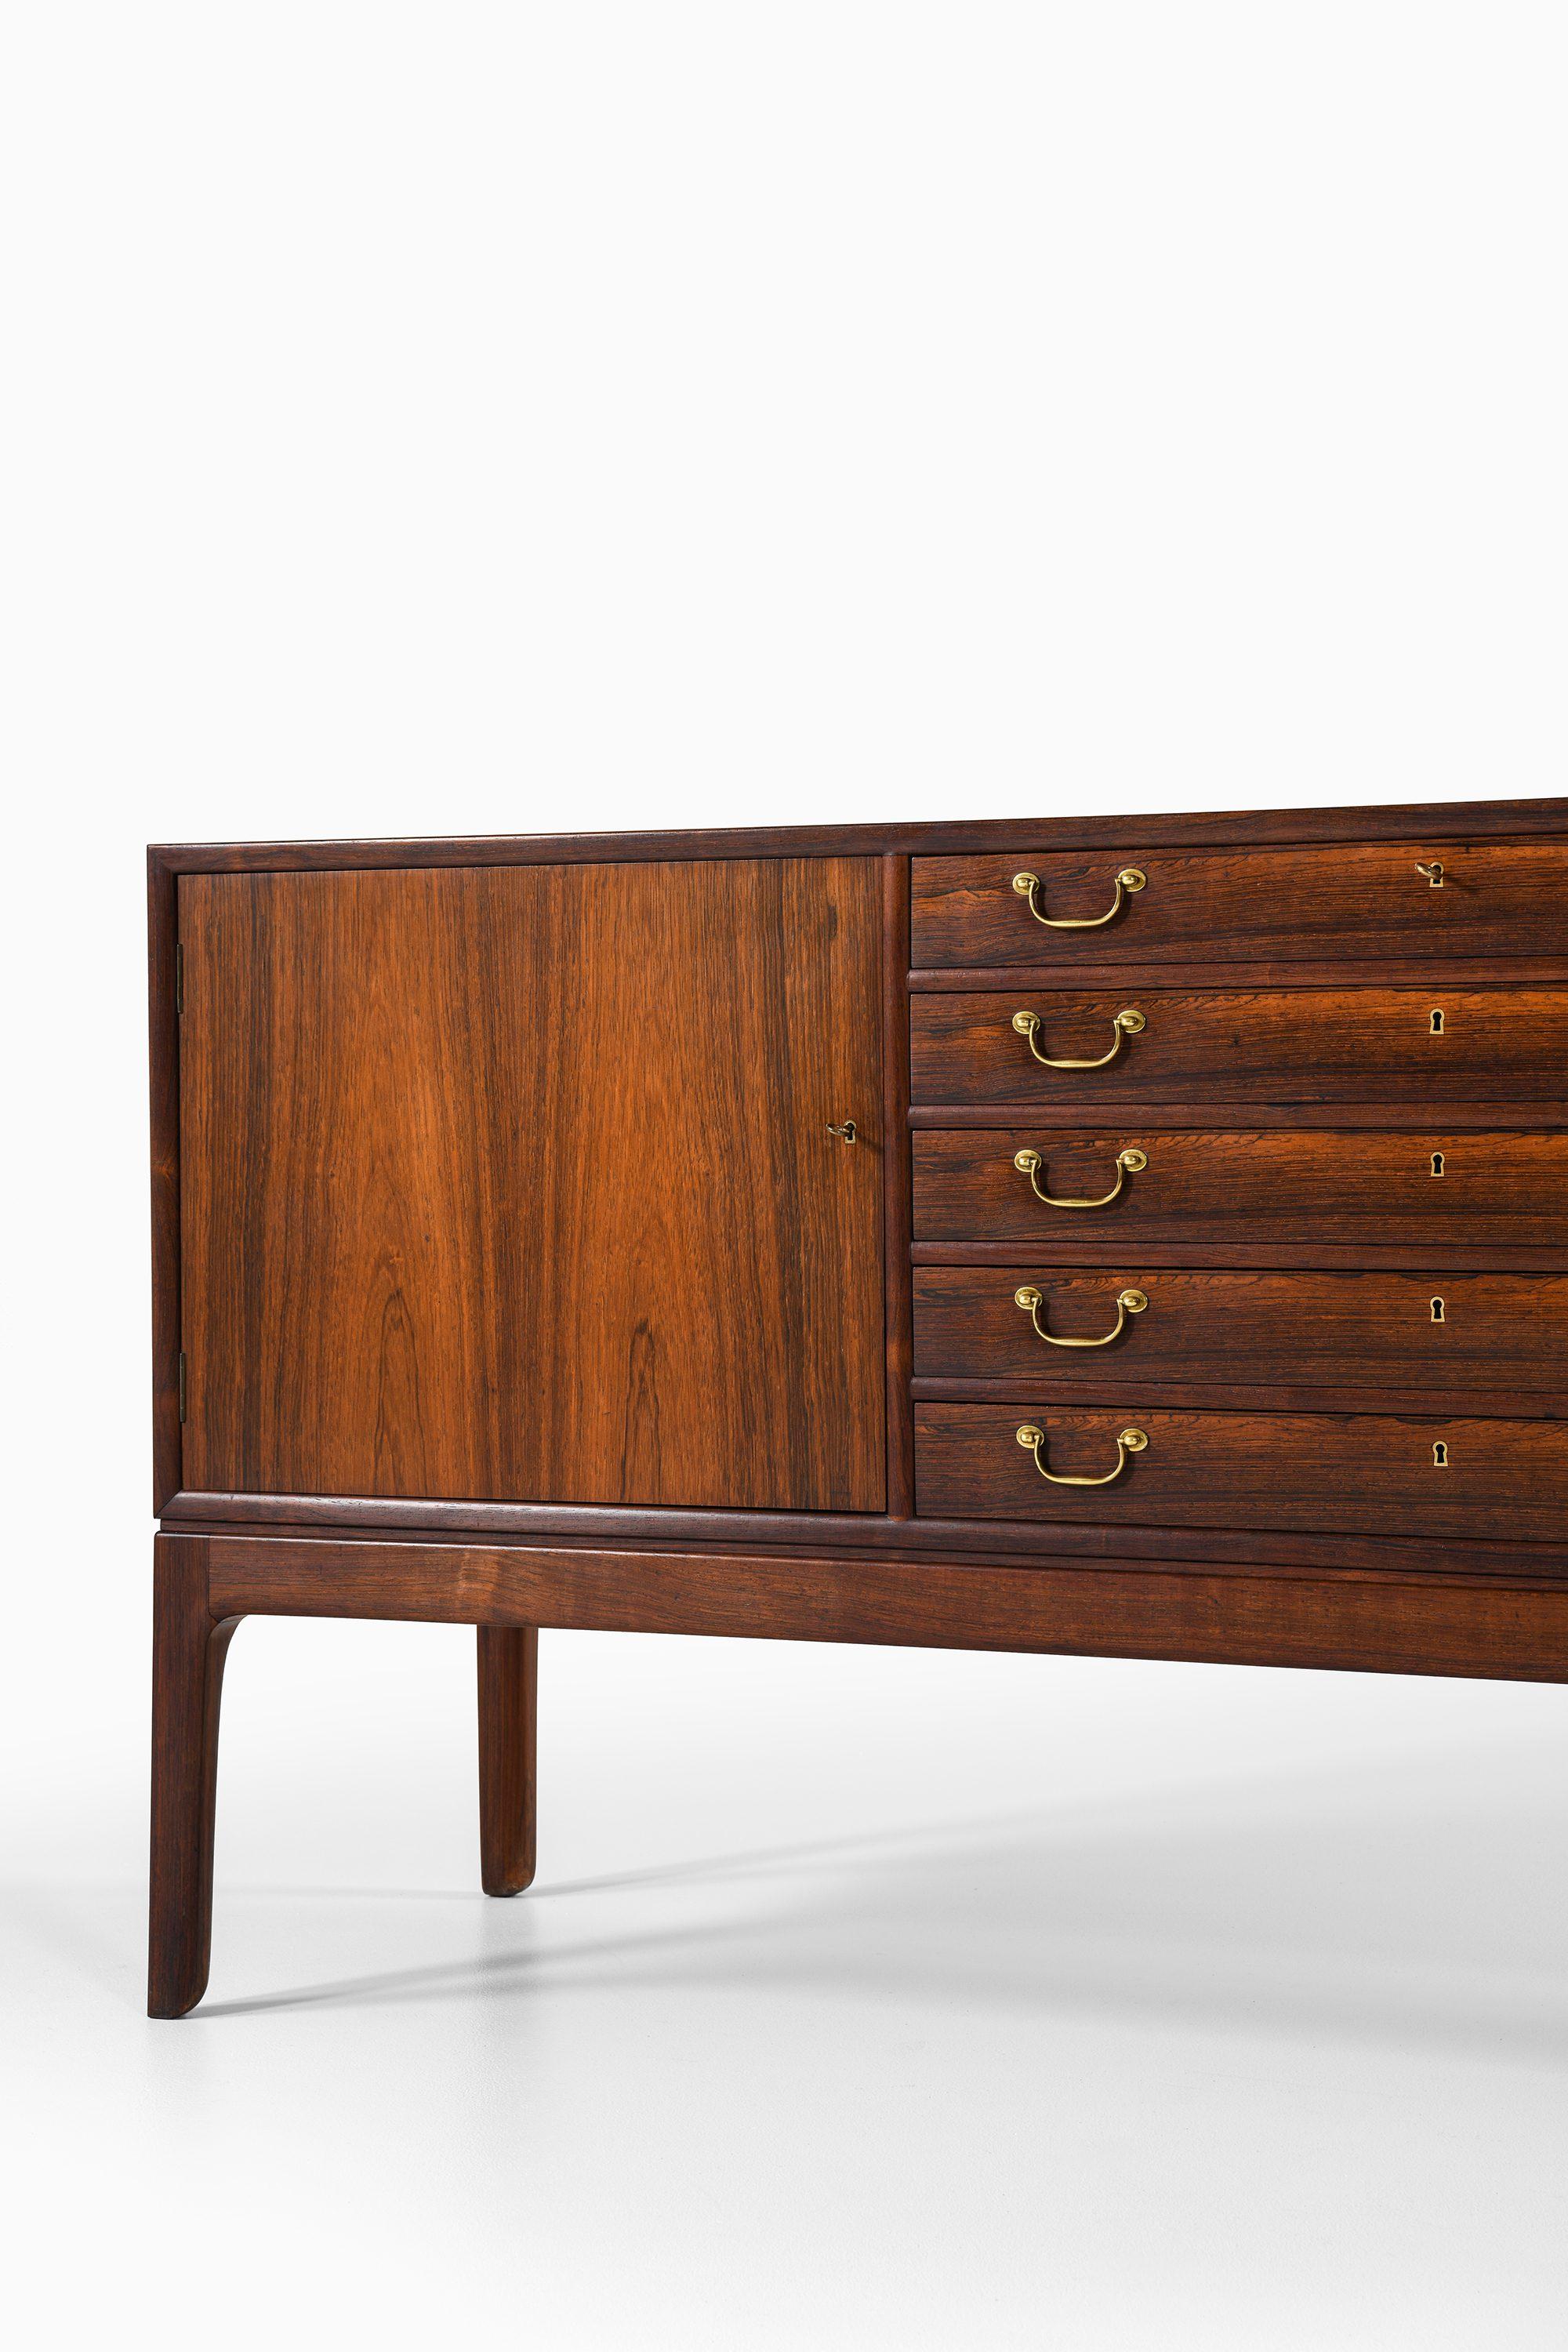 Sideboard in Rosewood and brass by Ole Wanscher In Good Condition For Sale In Limhamn, Skåne län